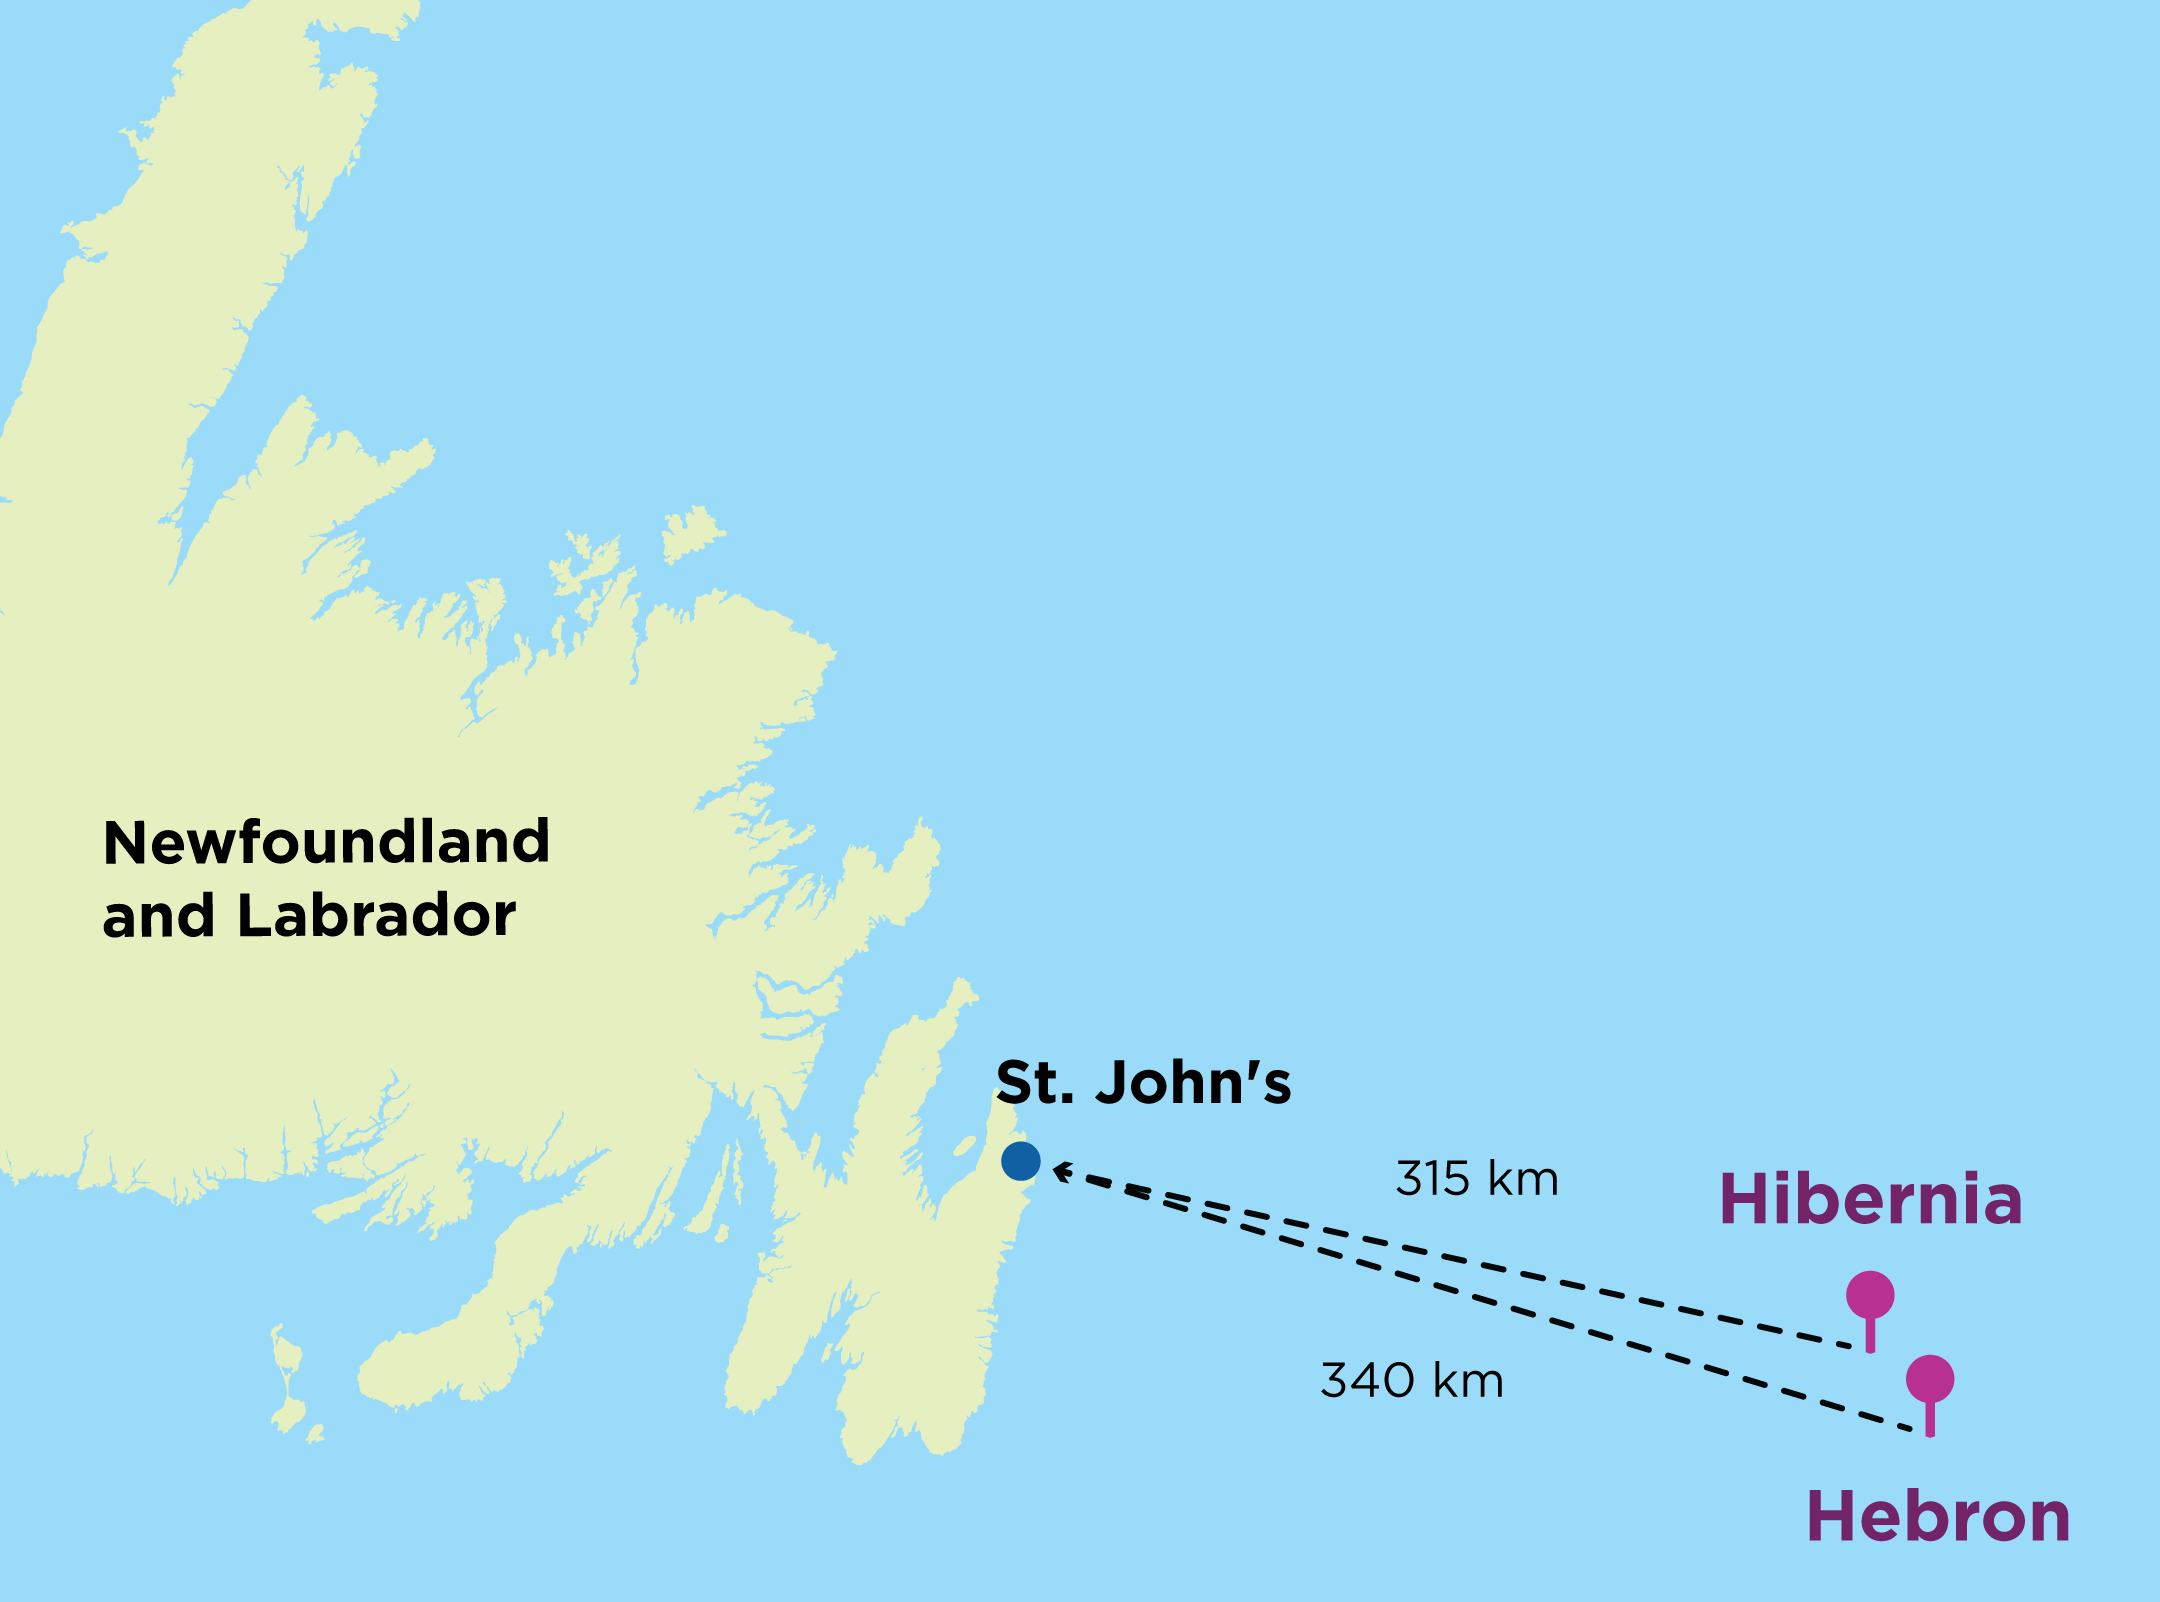 Map showing the distance from St. John's to the Hibernia and Hebron platforms